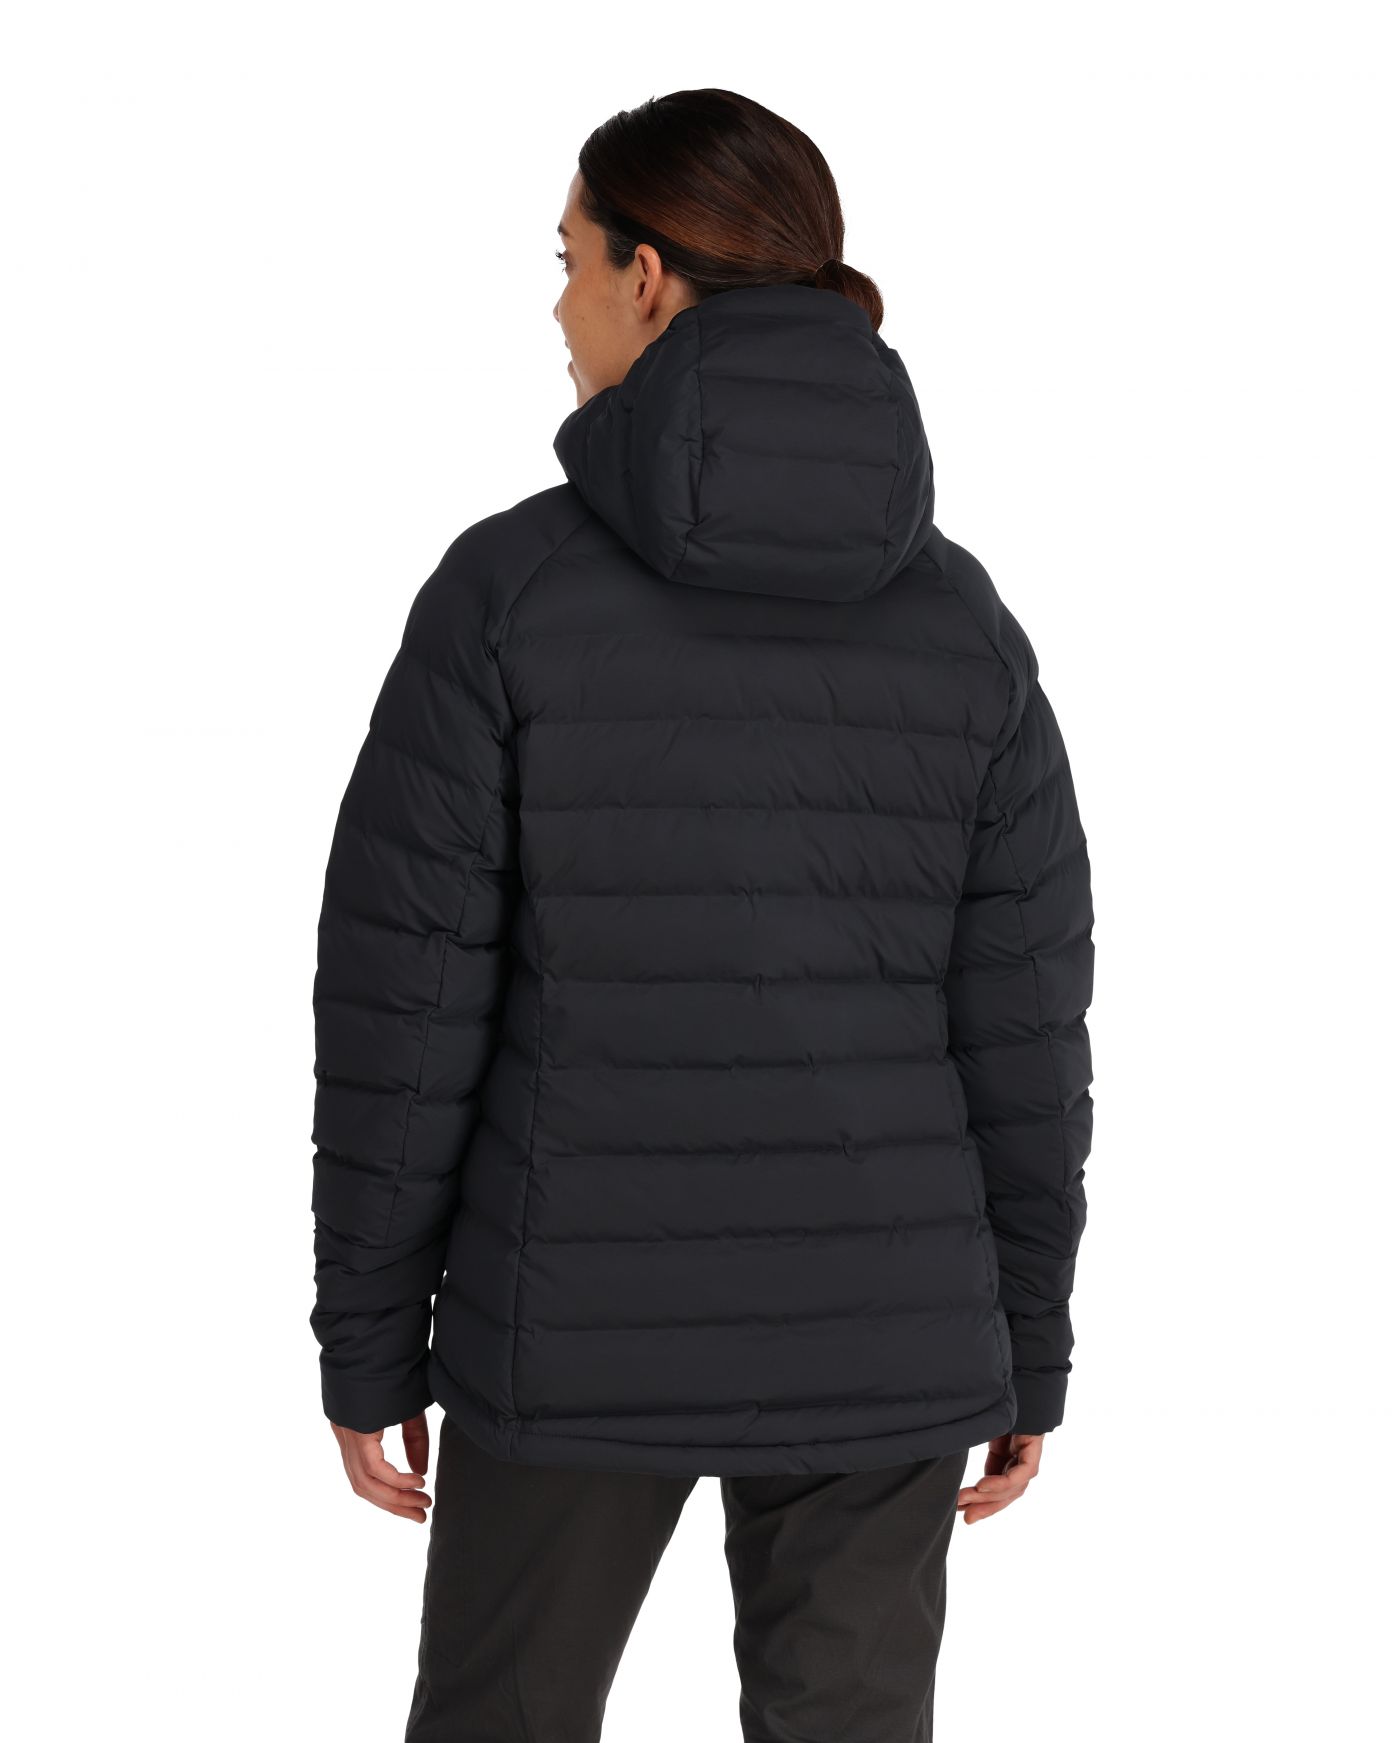 Simms ExStream Insulated Hooded Jacket for Men